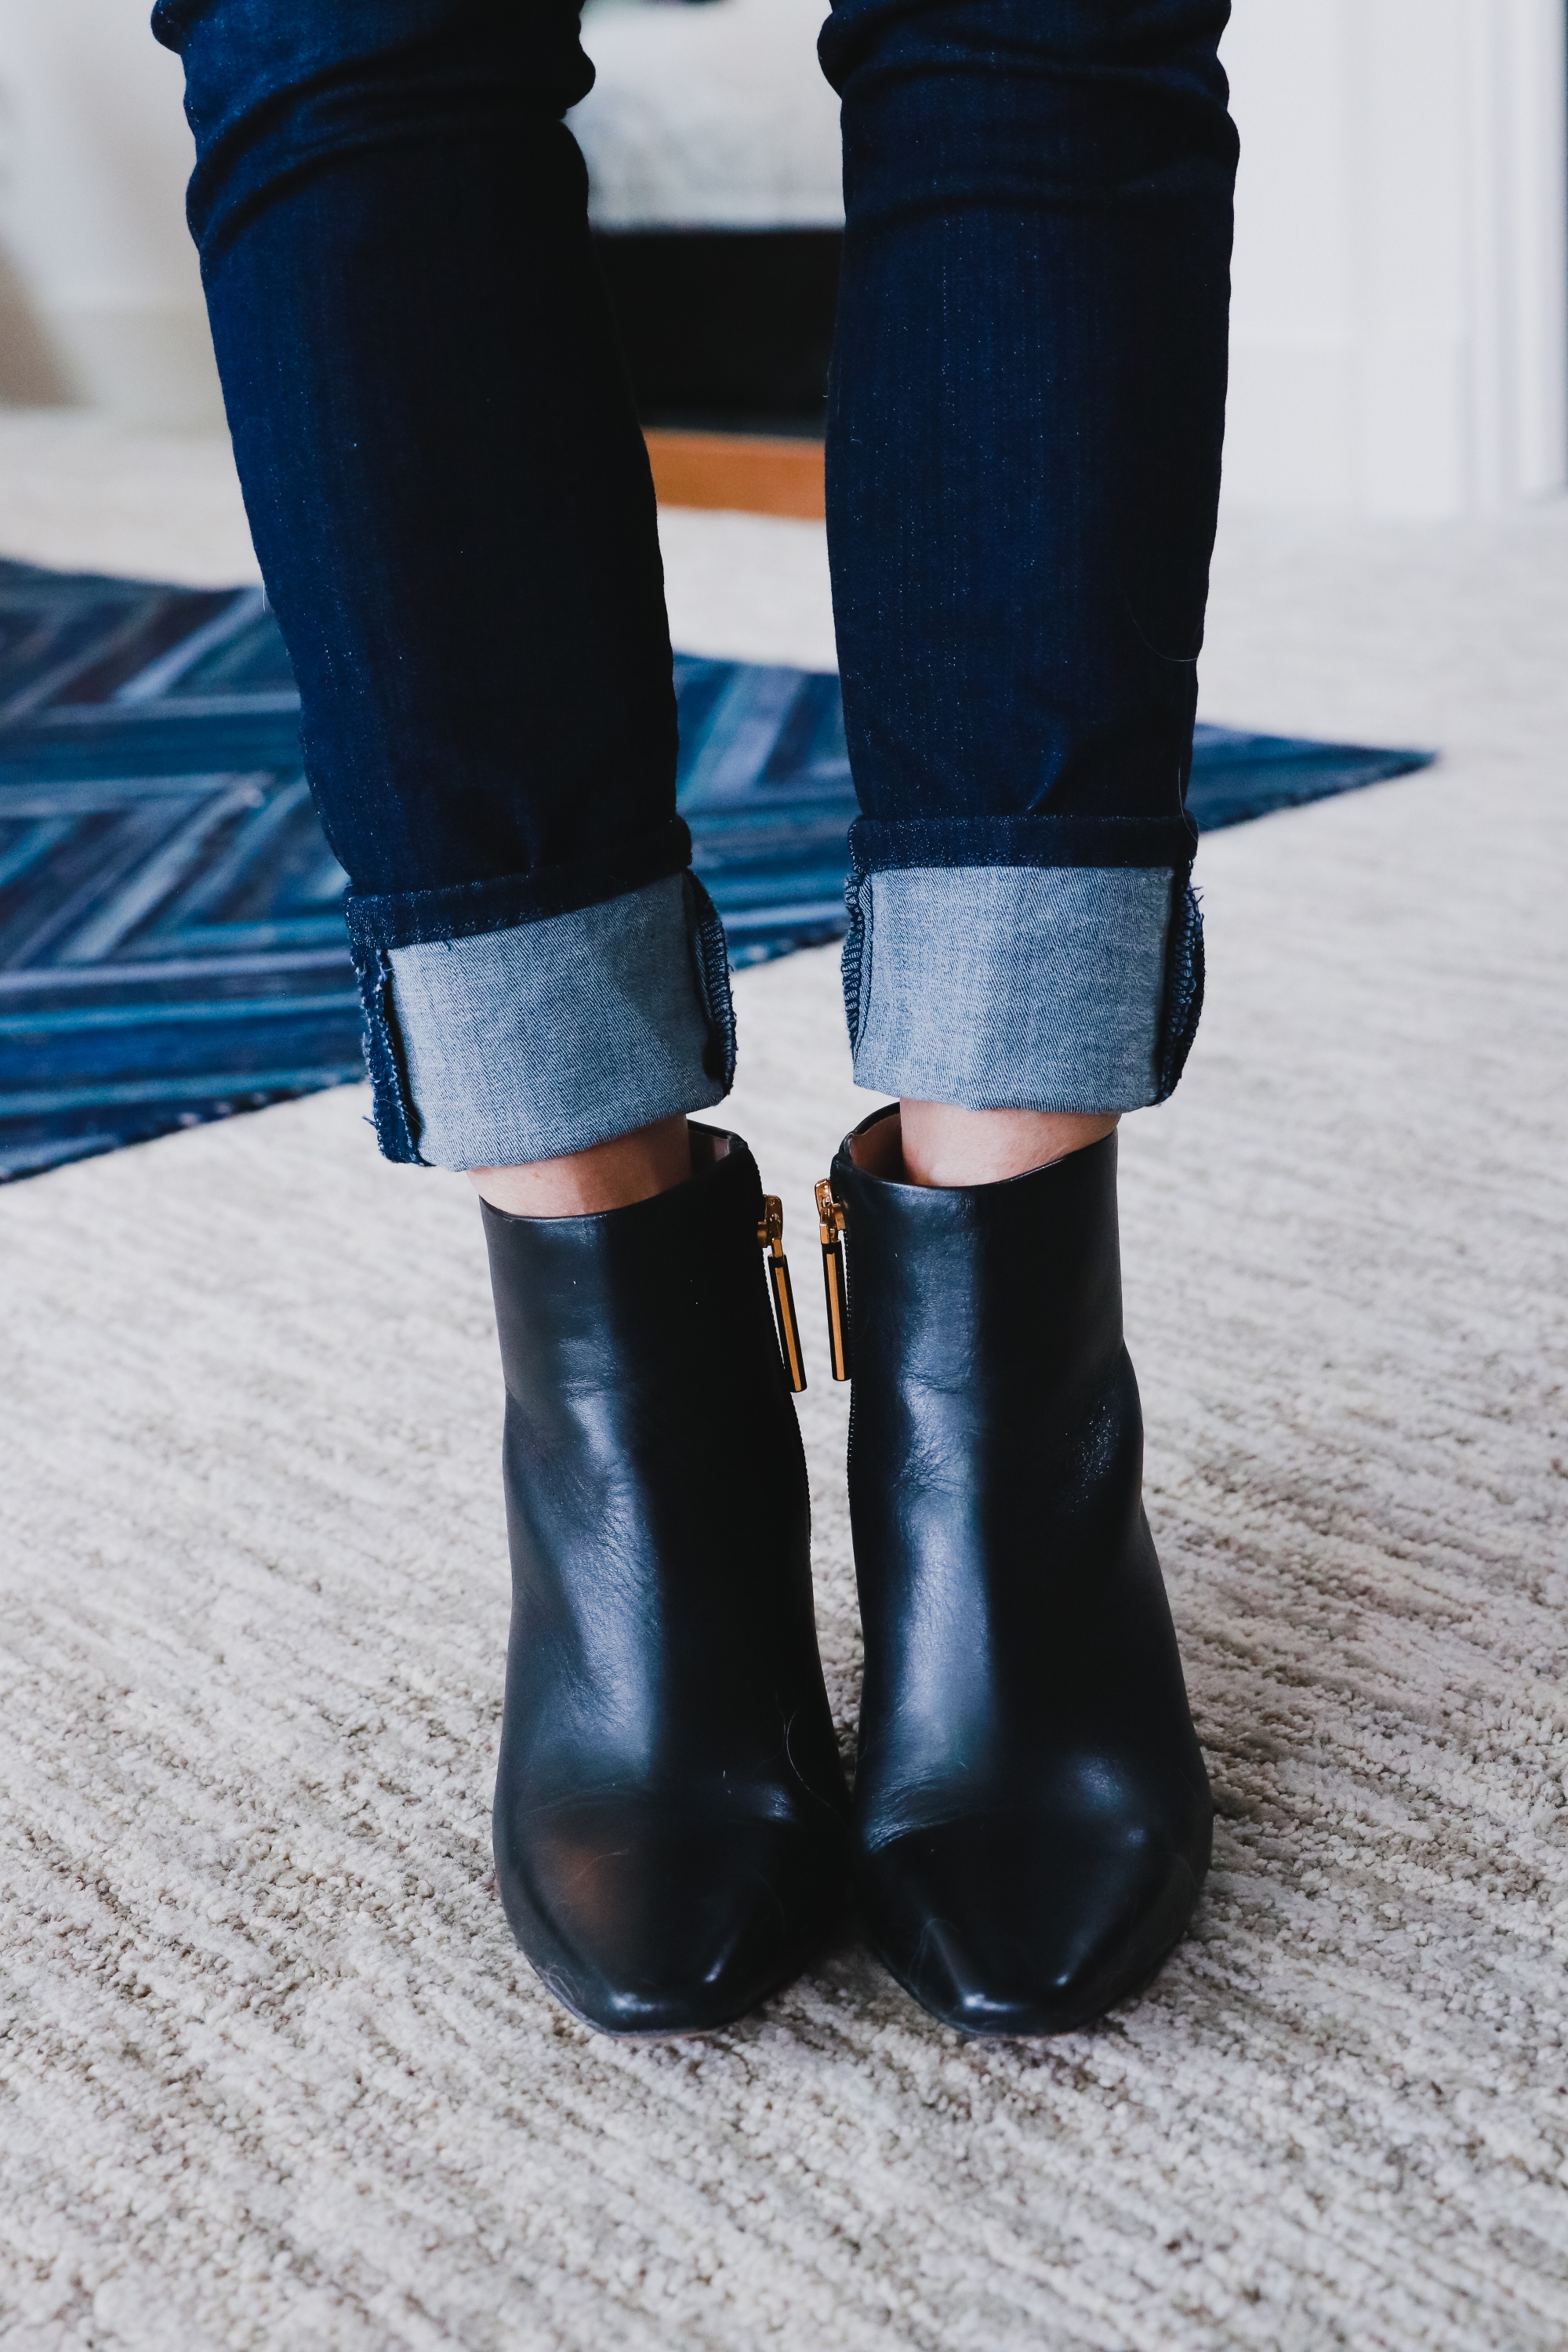 skinny jeans and ankle boots